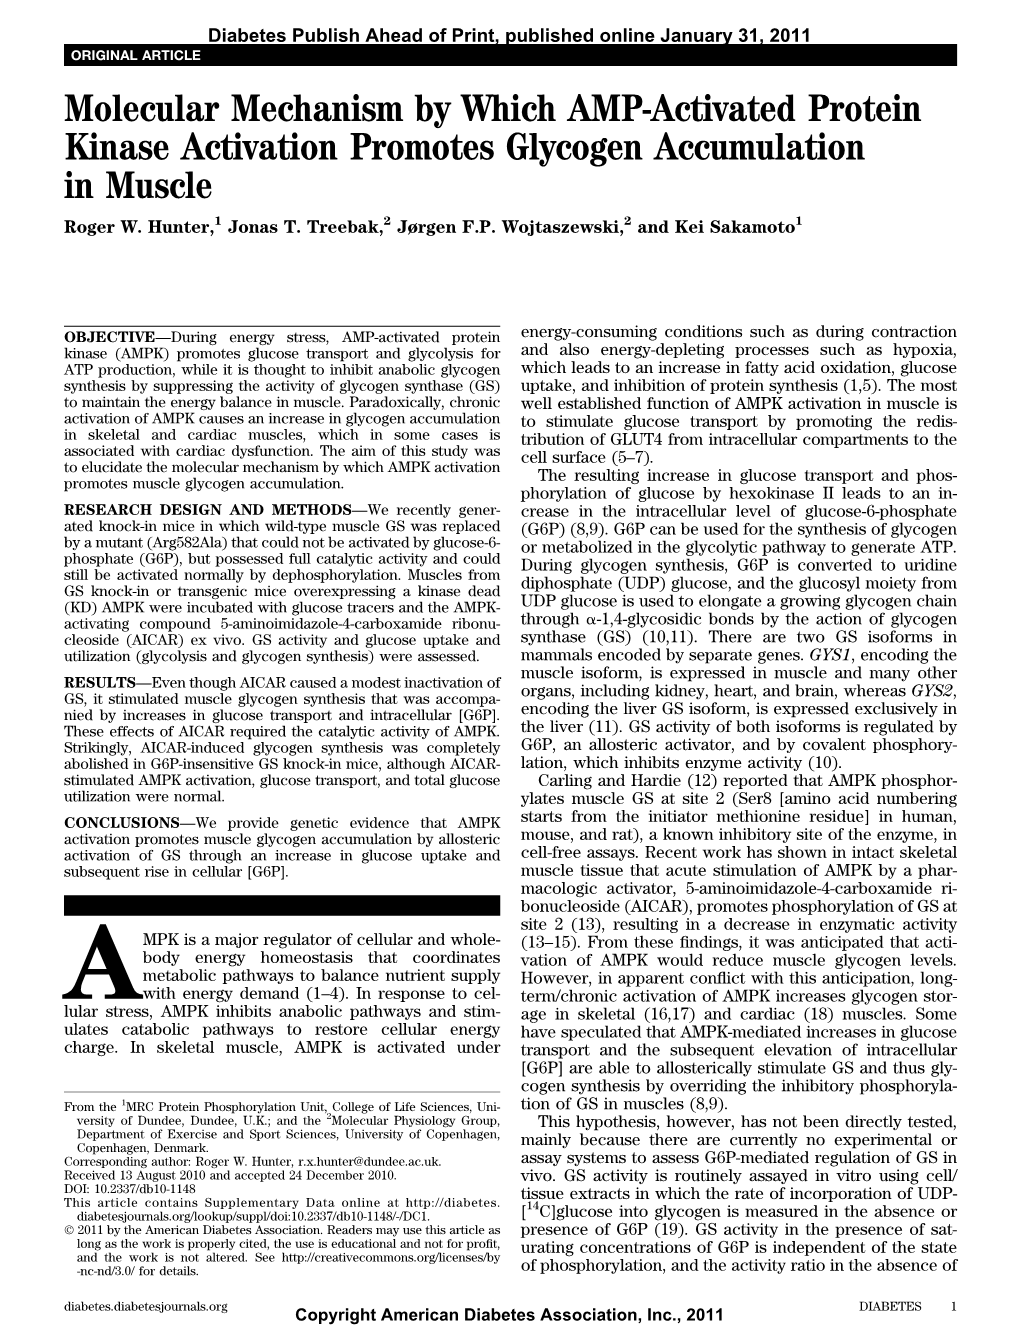 Molecular Mechanism by Which AMP-Activated Protein Kinase Activation Promotes Glycogen Accumulation in Muscle Roger W